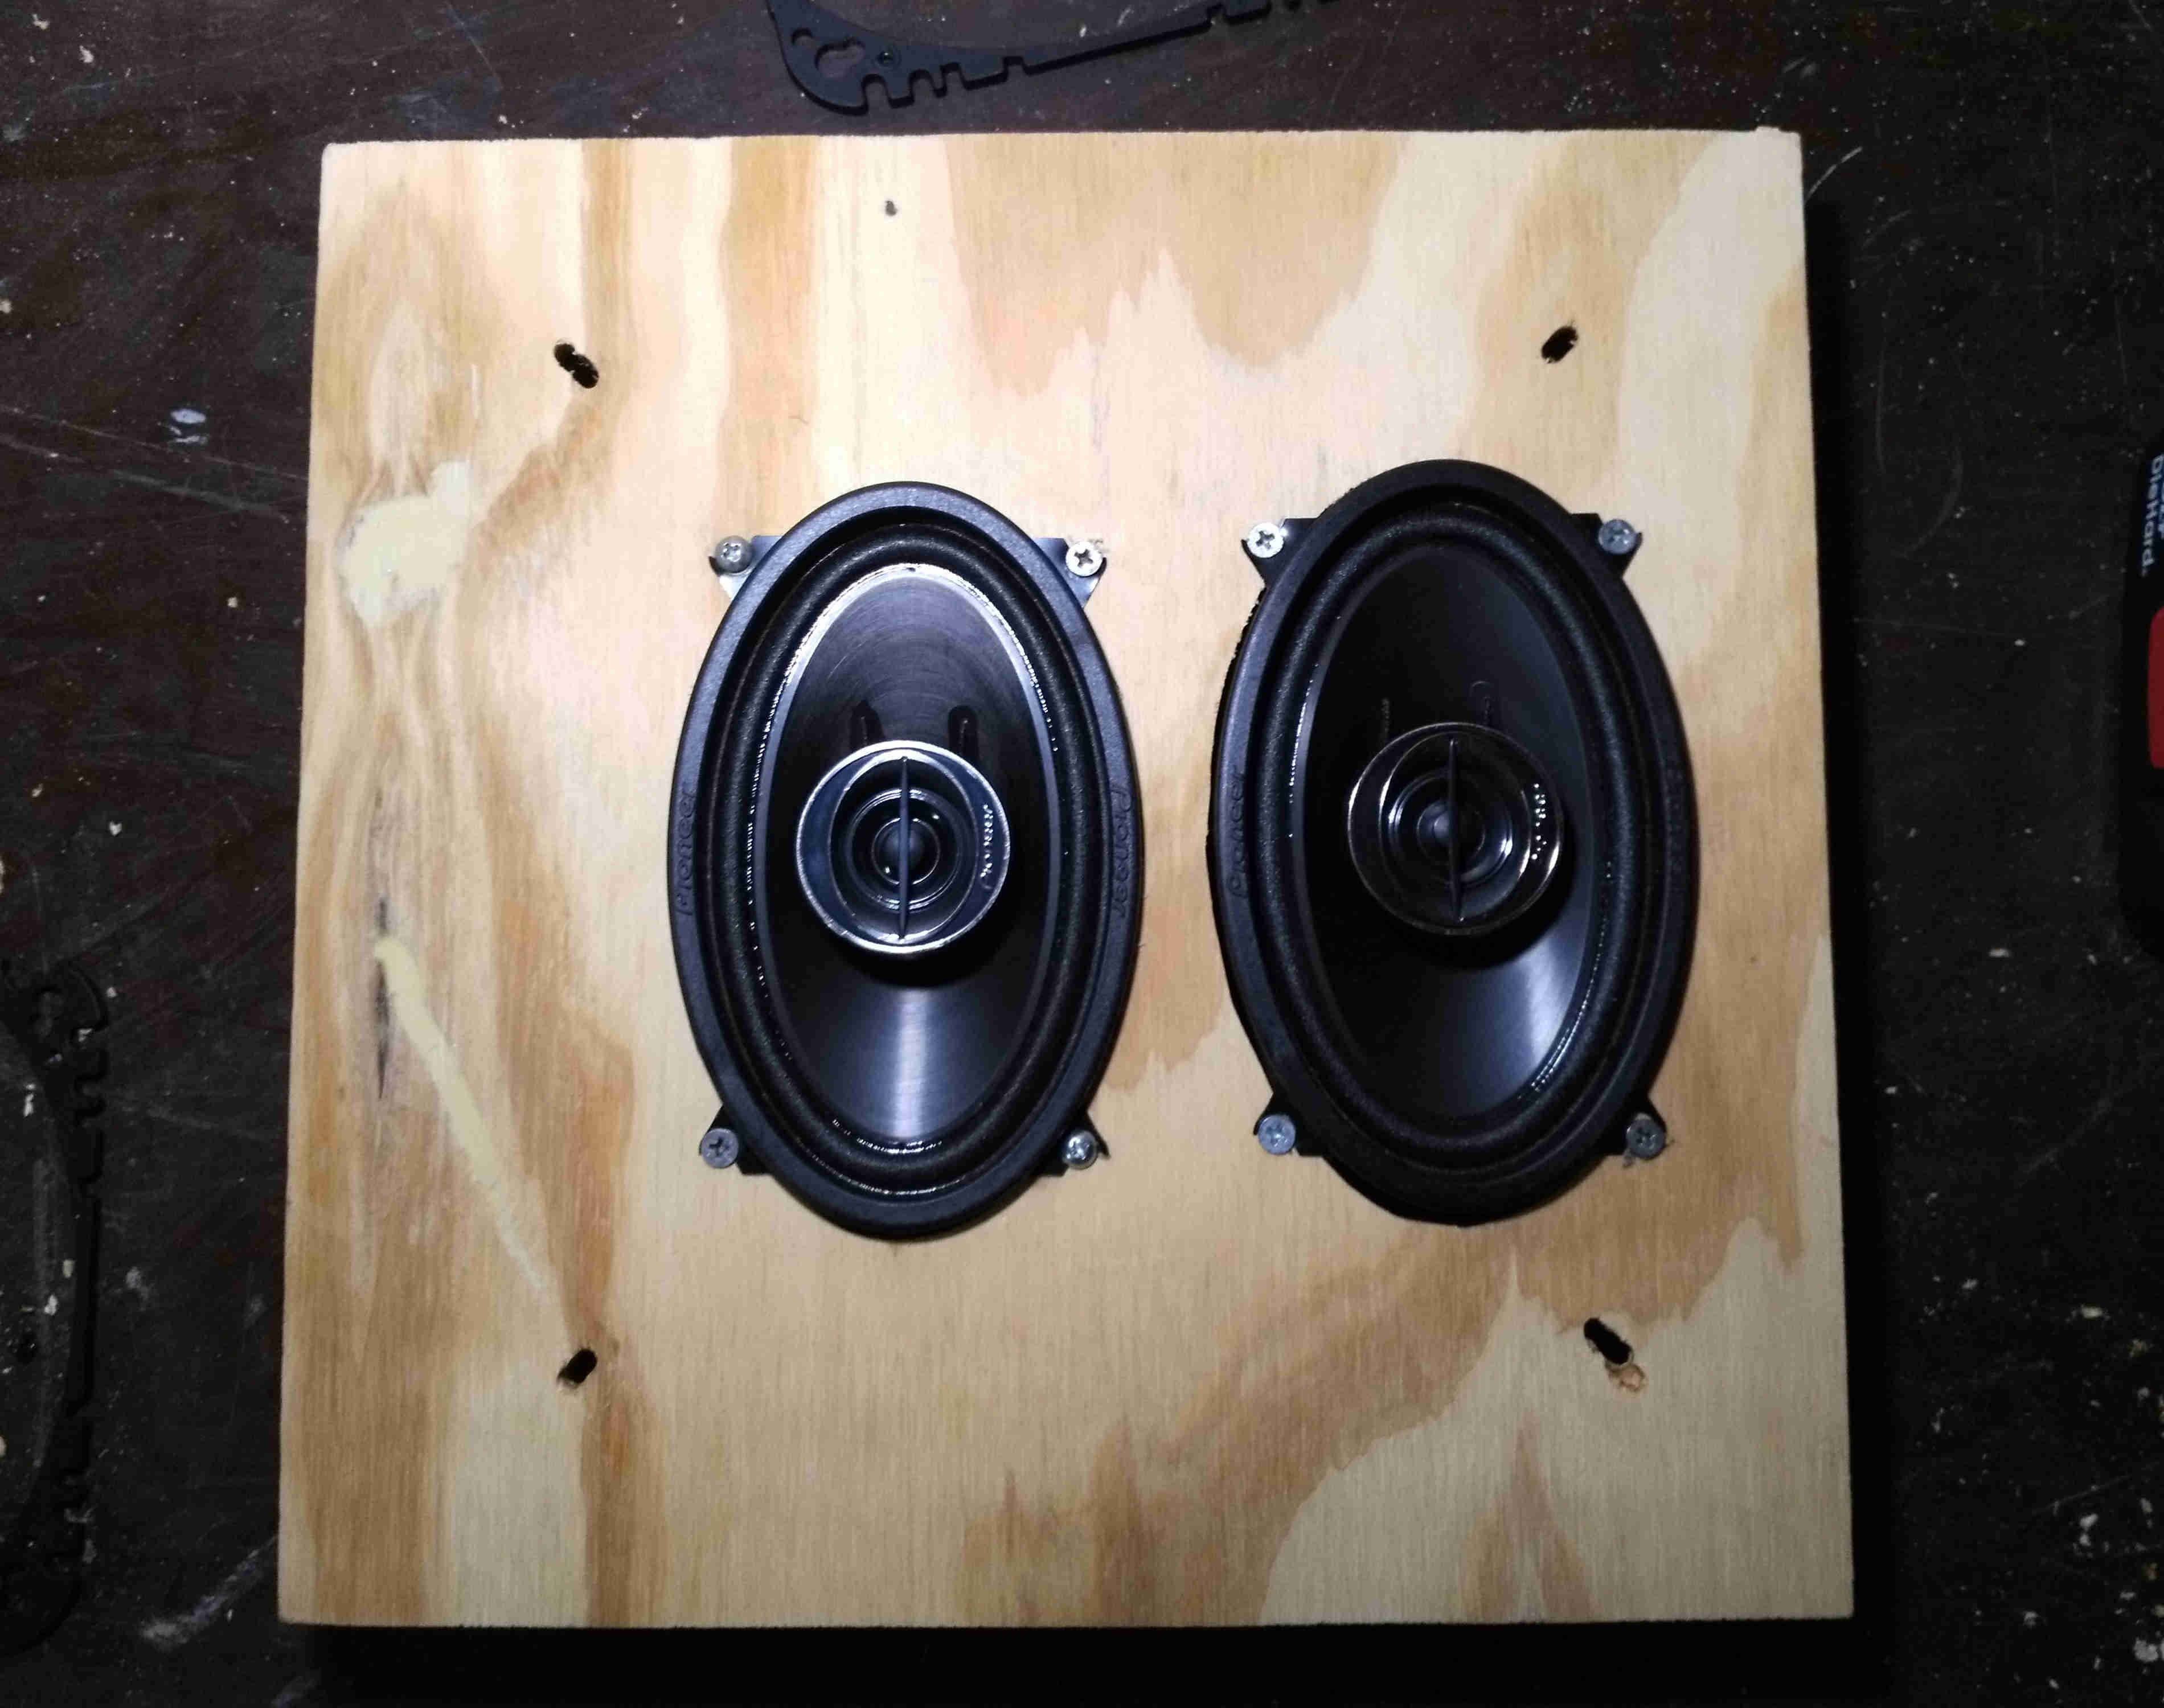 Front of mounted speakers